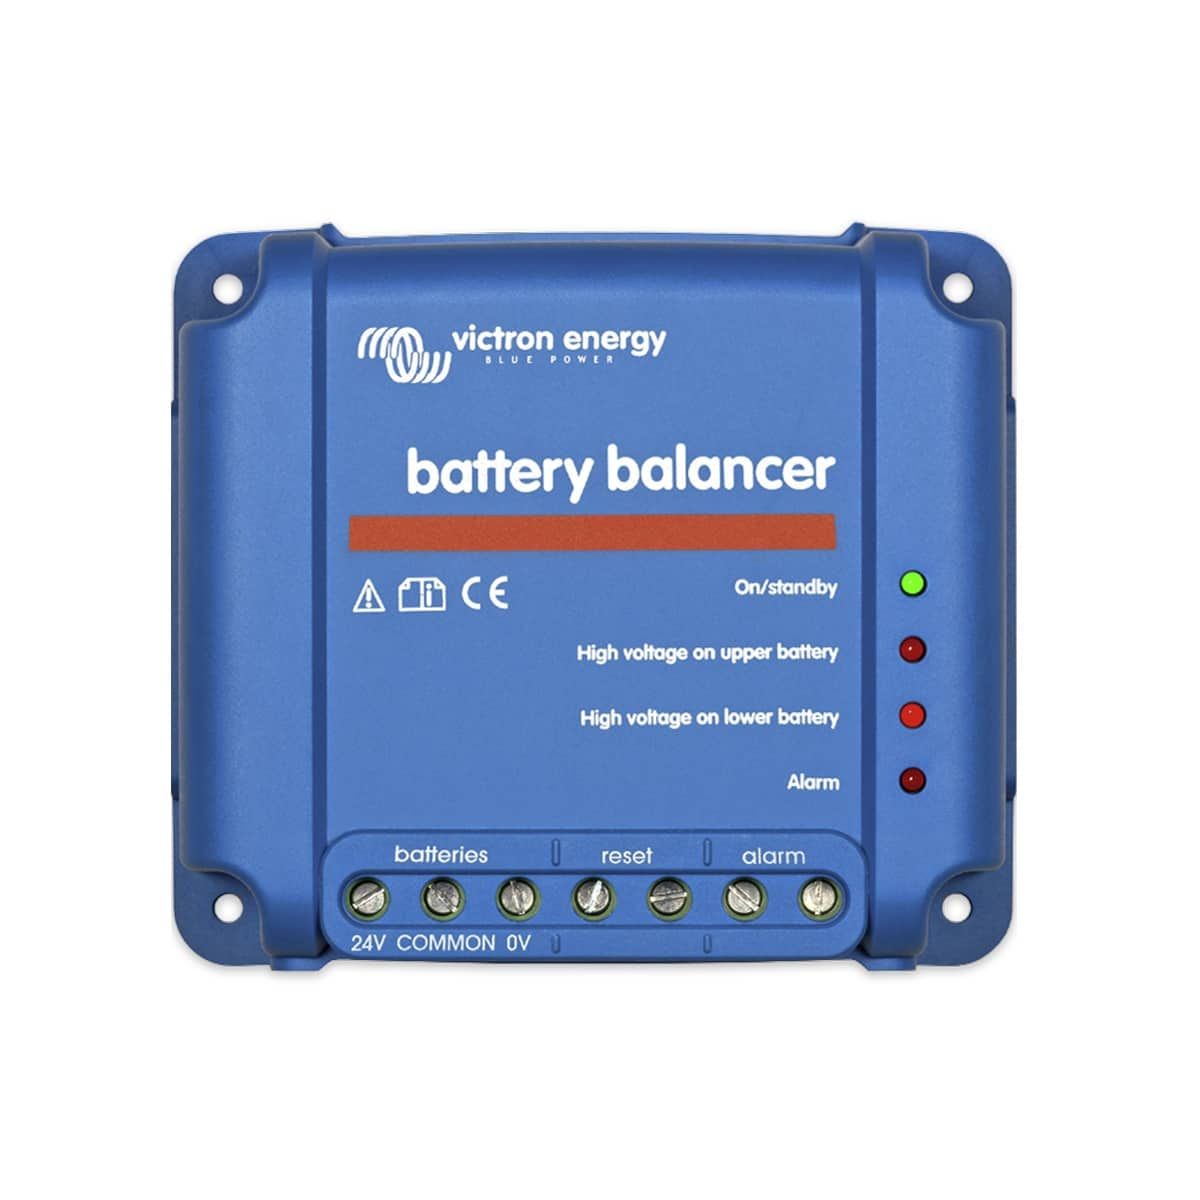 Victron Energy Battery Balancer, Shop Today. Get it Tomorrow!